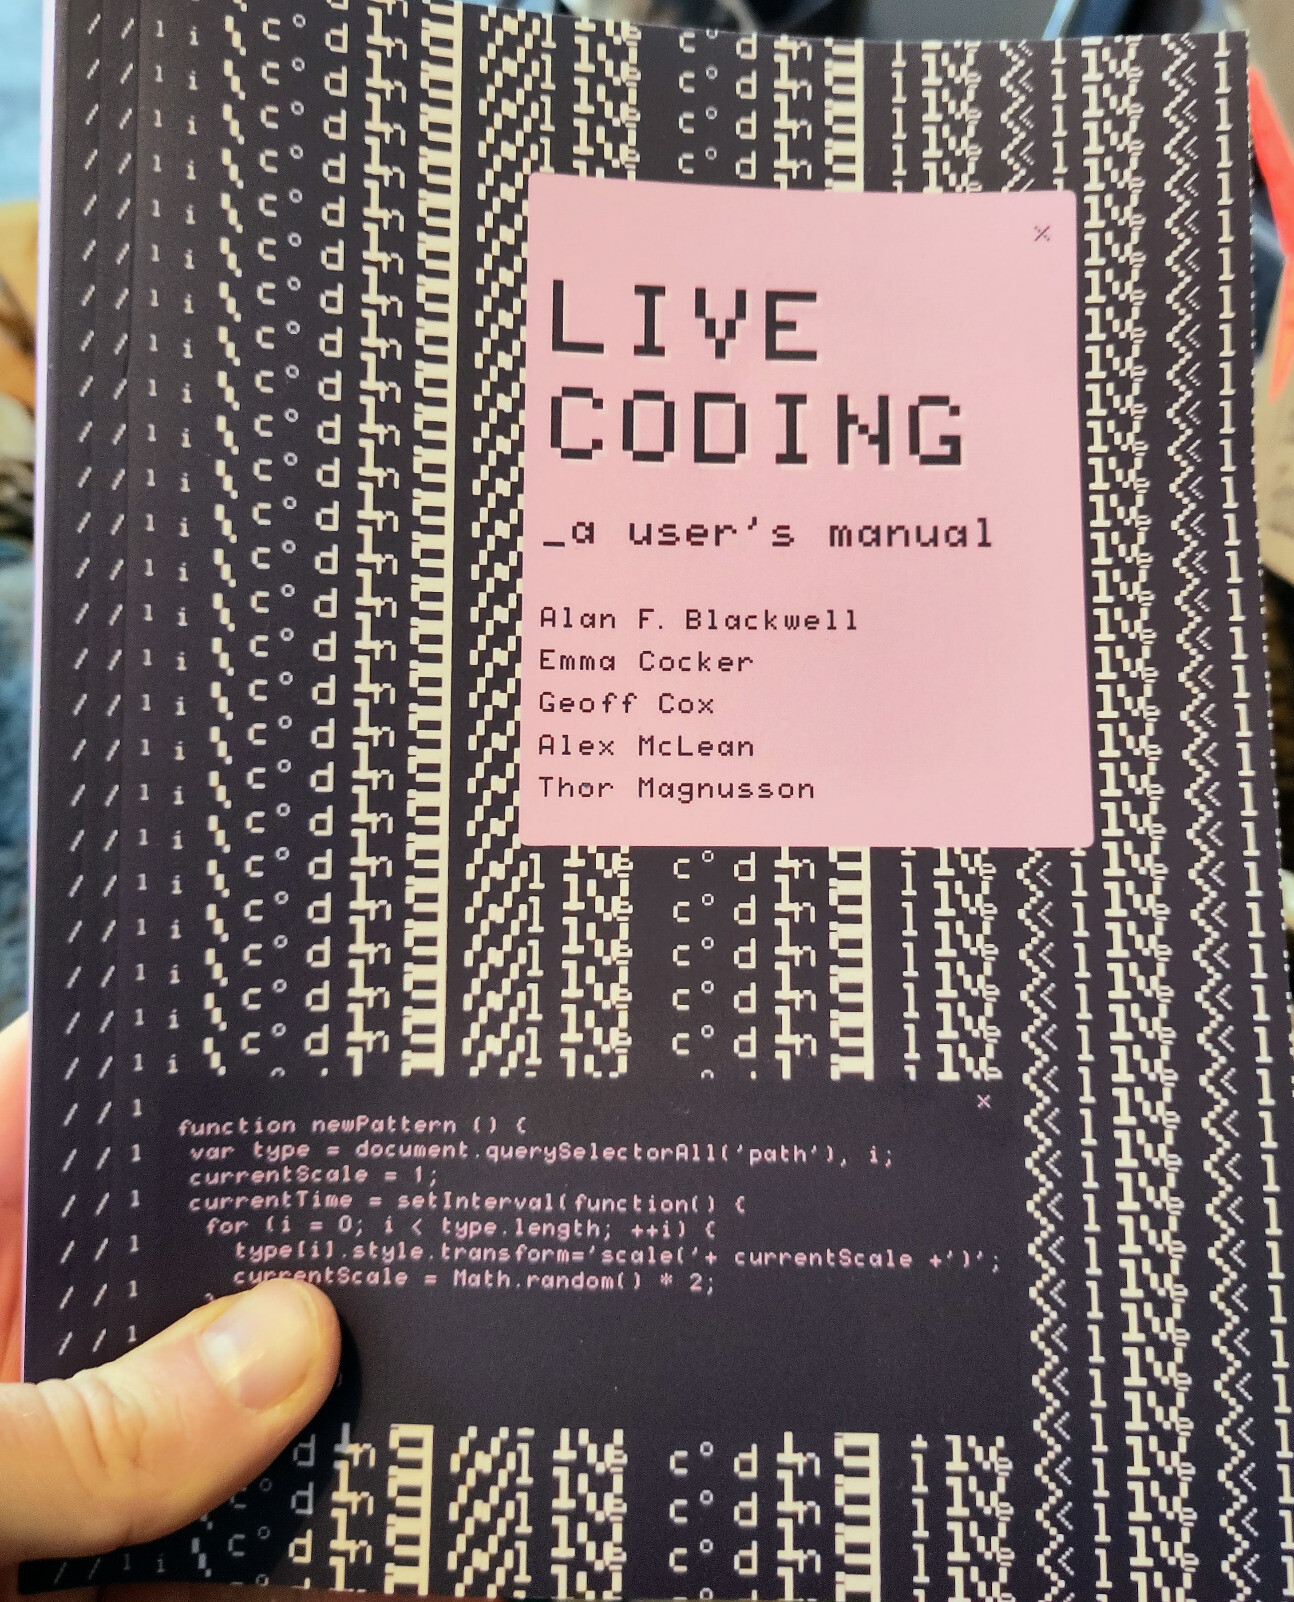 Book cover for LIVE CODING: a user's manual, by Alan F. Blackwell, Emma Cocker, Geoff Cox, Alex McLean and Thor Magnusson With text 'live coding' in the background manipulated into a repeating pattern. The code for generating this pattern is also shown in __a box, partially obscured by my thumb, saying something like: function newPattern () { var type = document.querySelectorAll('path'), i; currentScale = 1; currentTime = setInterval( function() { for (i = 0; i < type.length; ++i) ( __type[i].style.transform='scale('+ currentScale +)'; currentScale = Math.random() * 2; } }